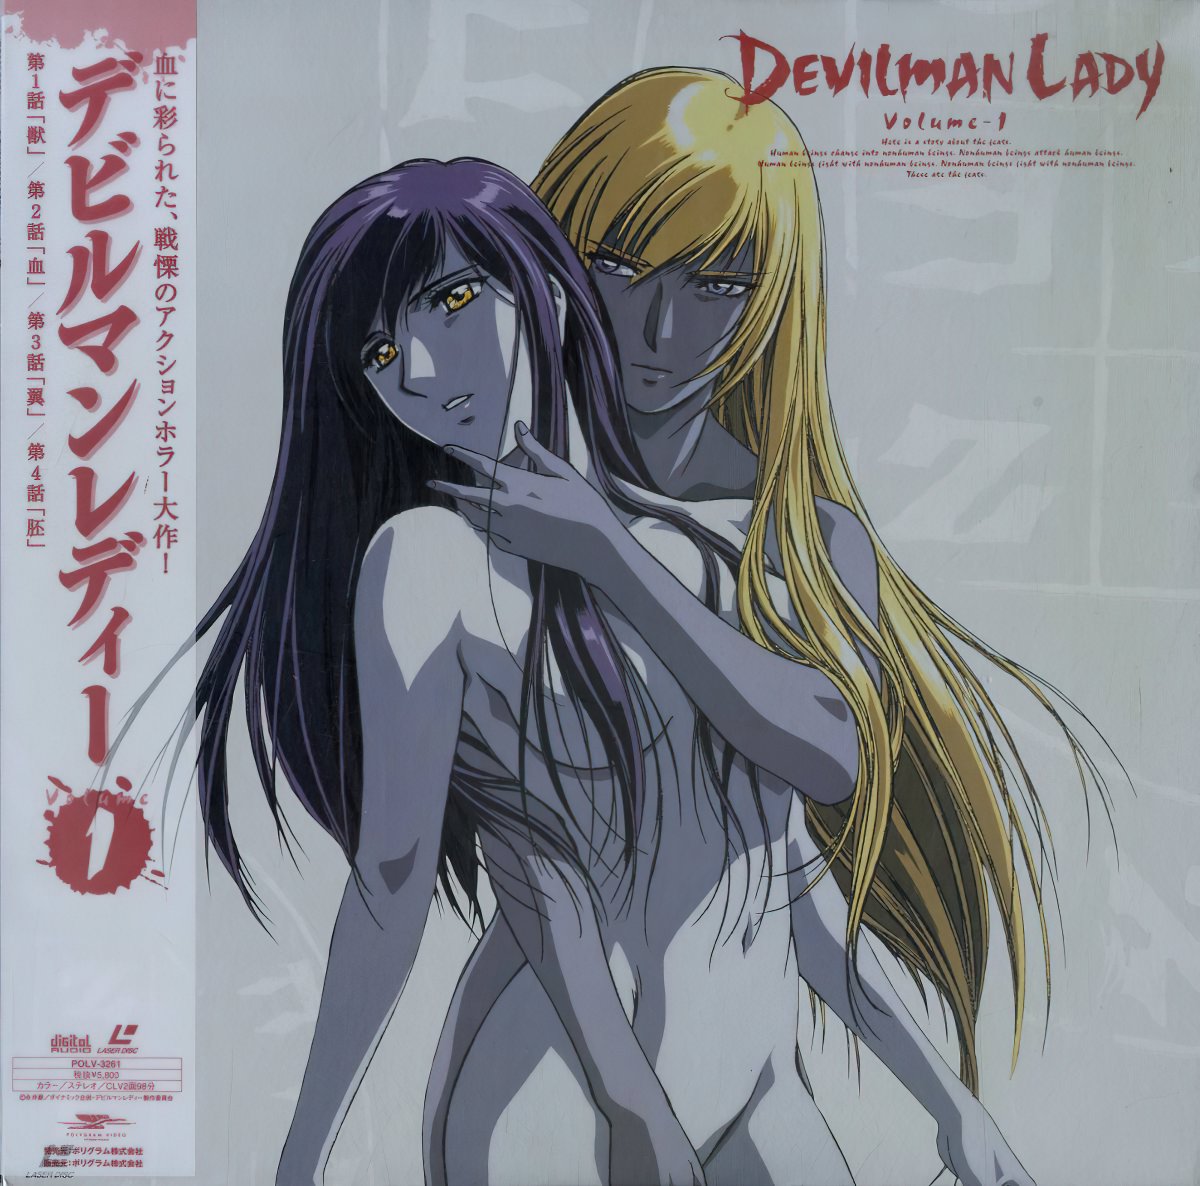 I just finished the 26 episodes of the Devil Lady anime, I liked it, it succeeds very well with its dark horror themes, the protagonist Jun is very well characterized, the OST/openings are phenomenal, an anime that I recommend to everyone even if you don't know Devilman
Rating 9